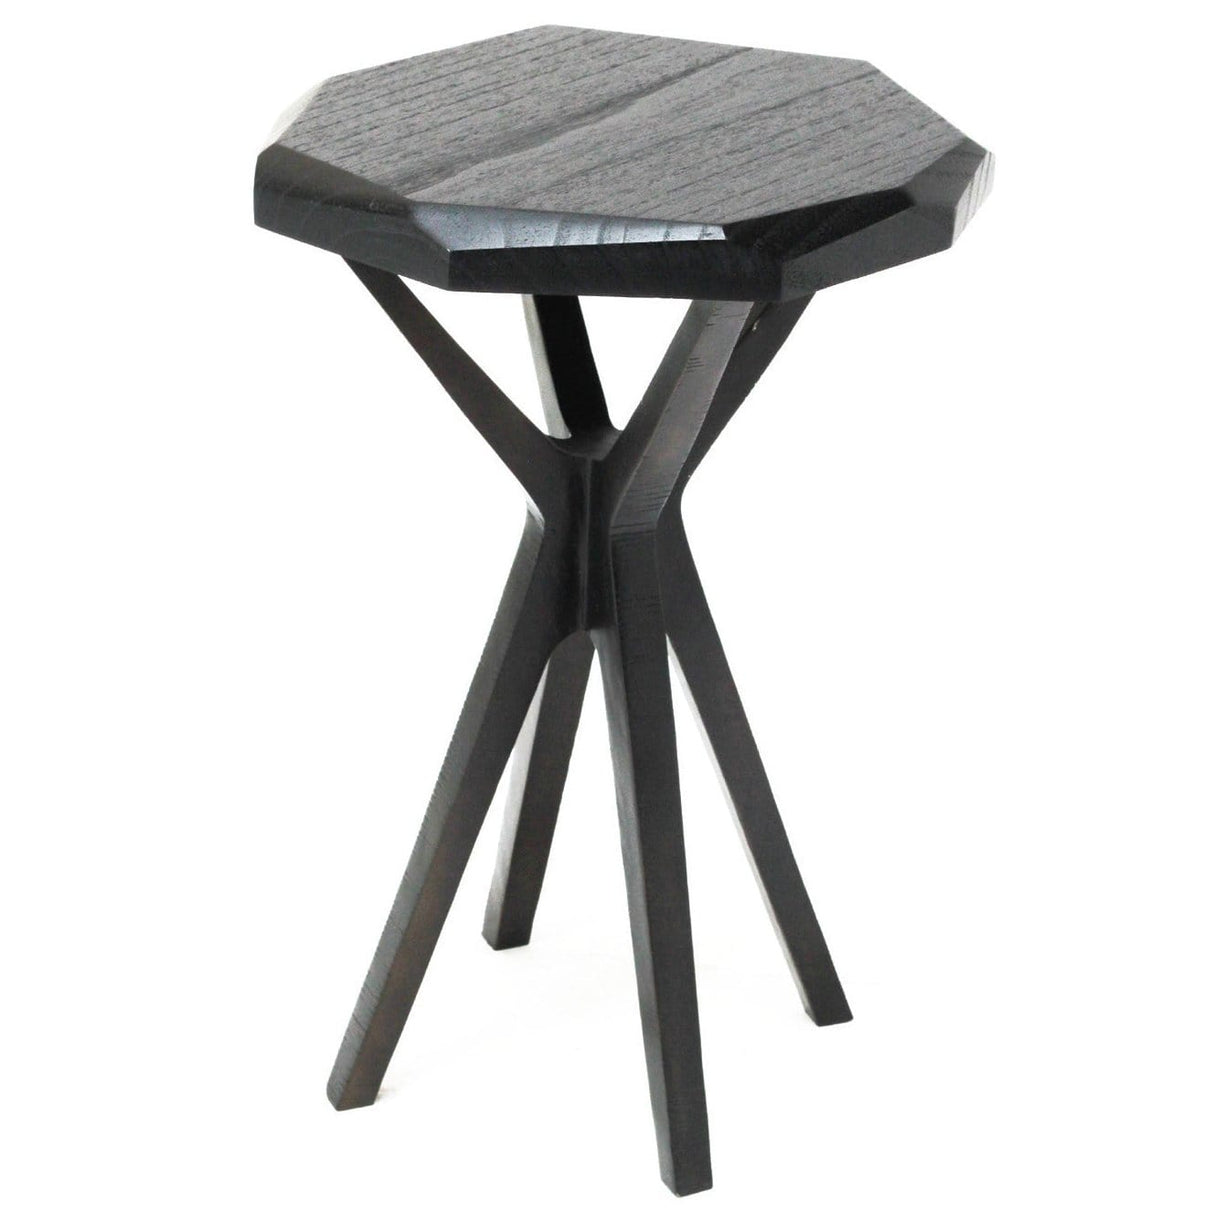 Oly Studio Chase Side Table Furniture oly-chase-side-table